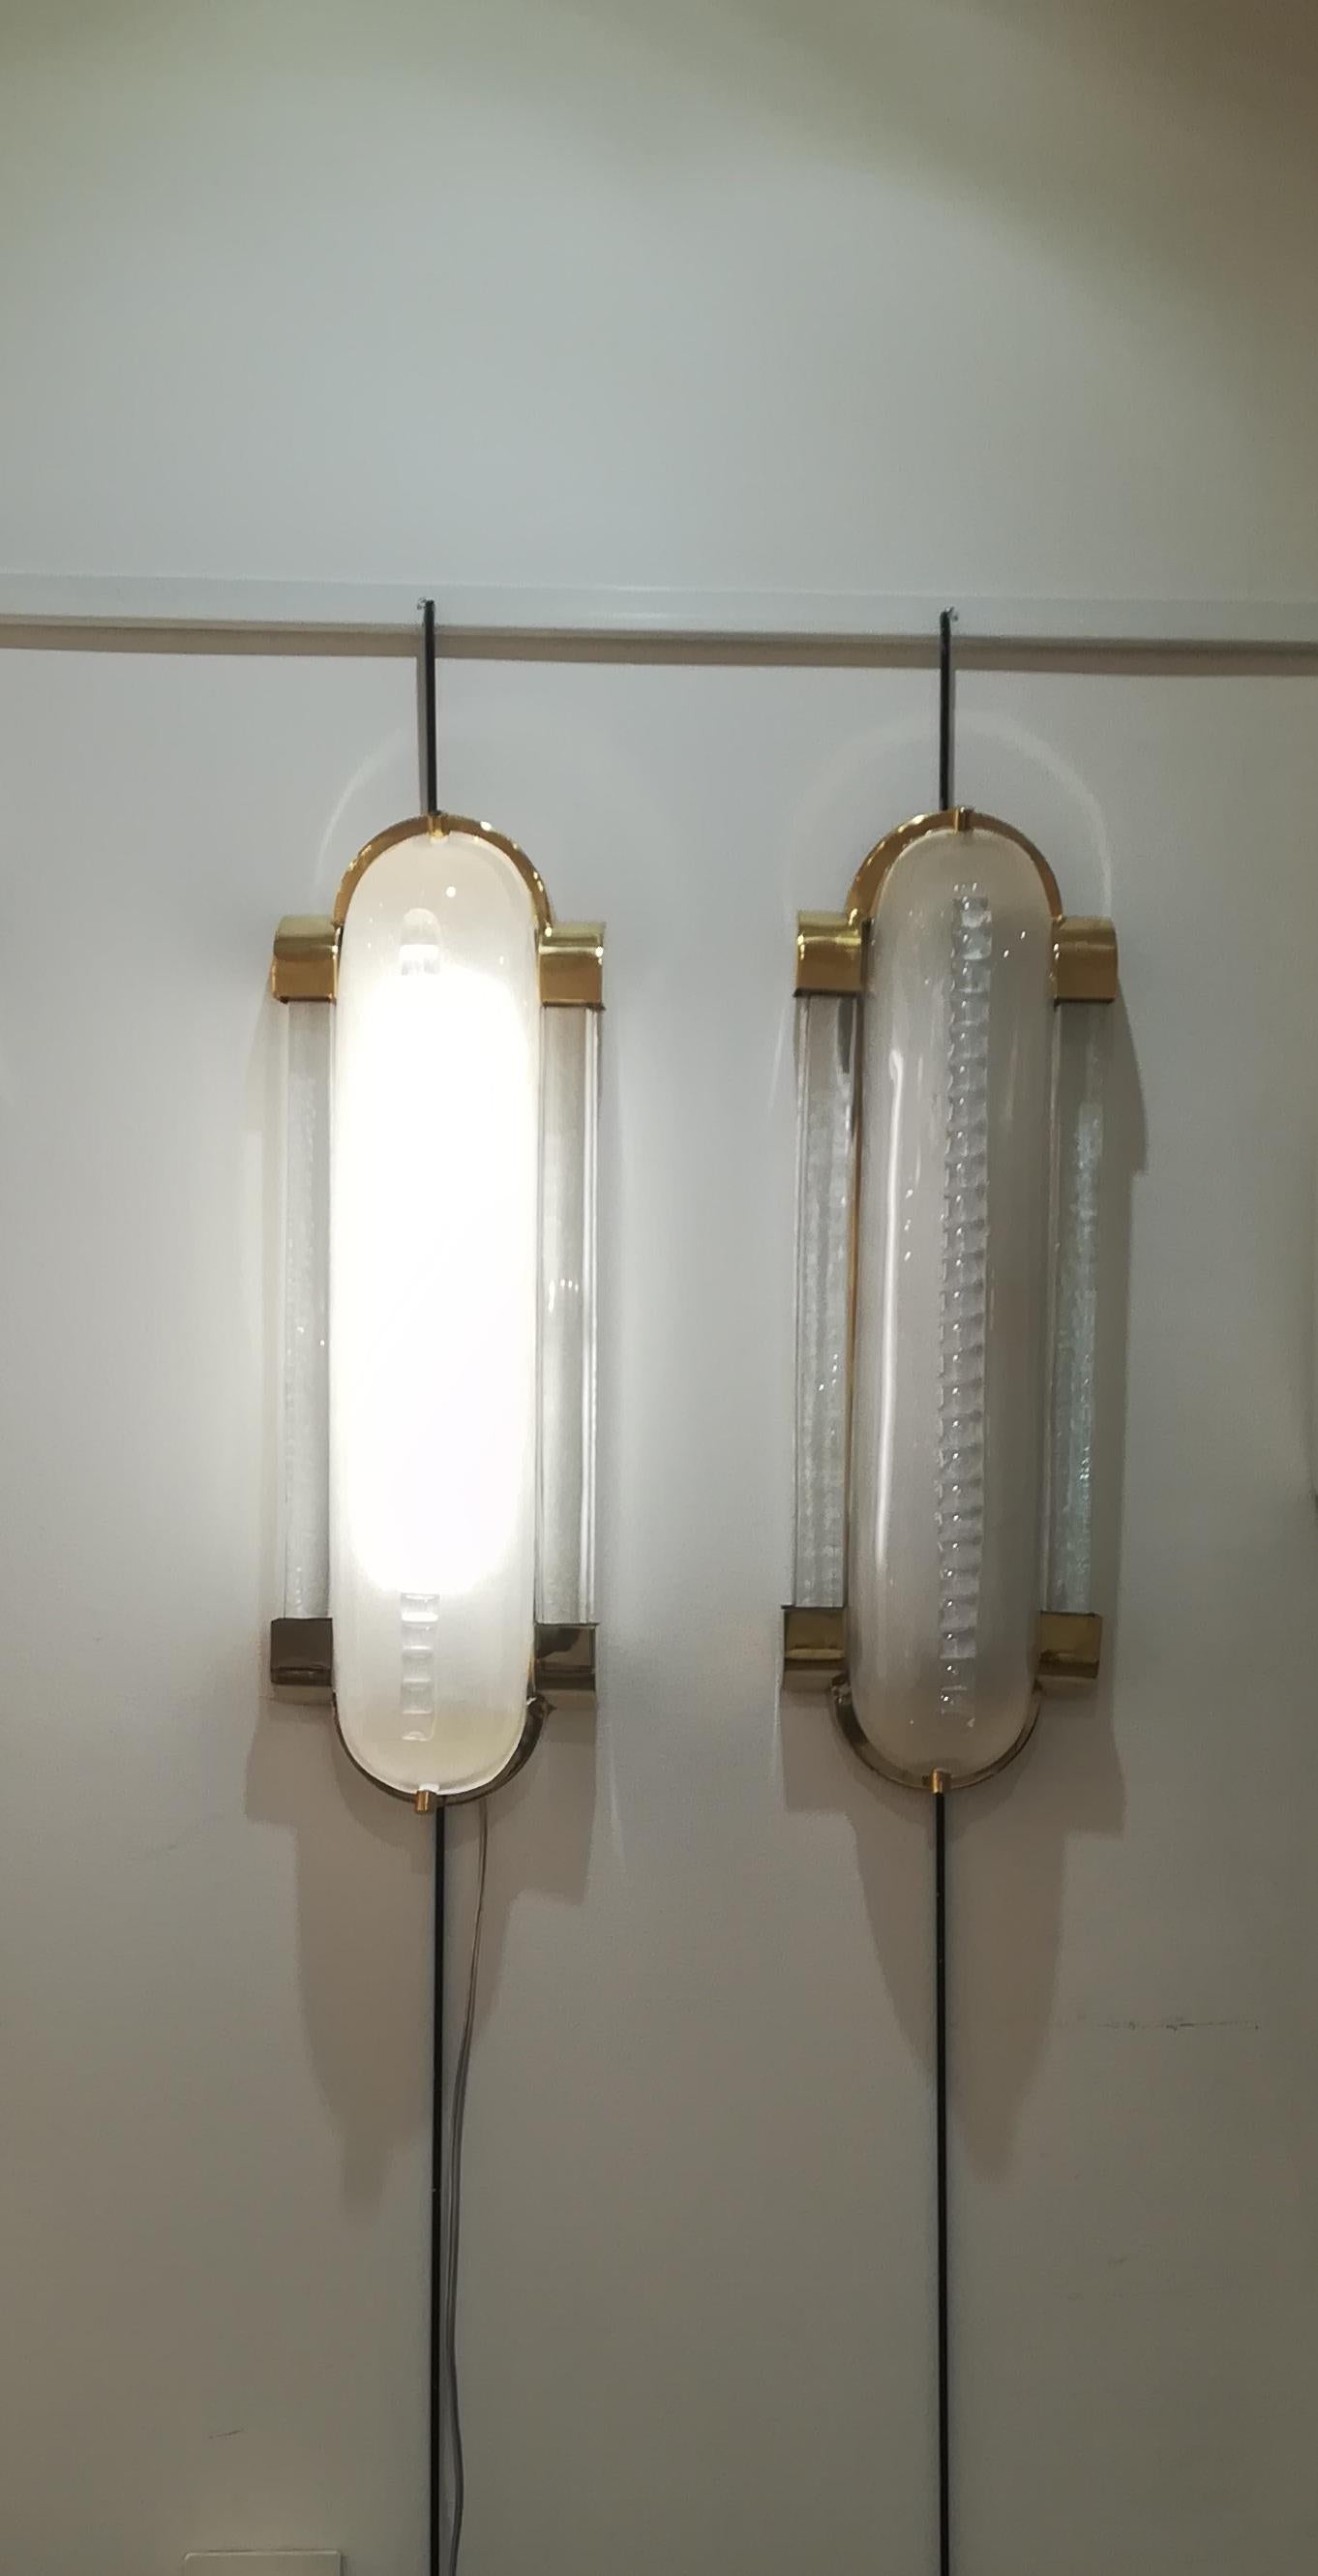 Beautiful pair of brass wall sconces in Murano curved satiny glass. Notches decor.
